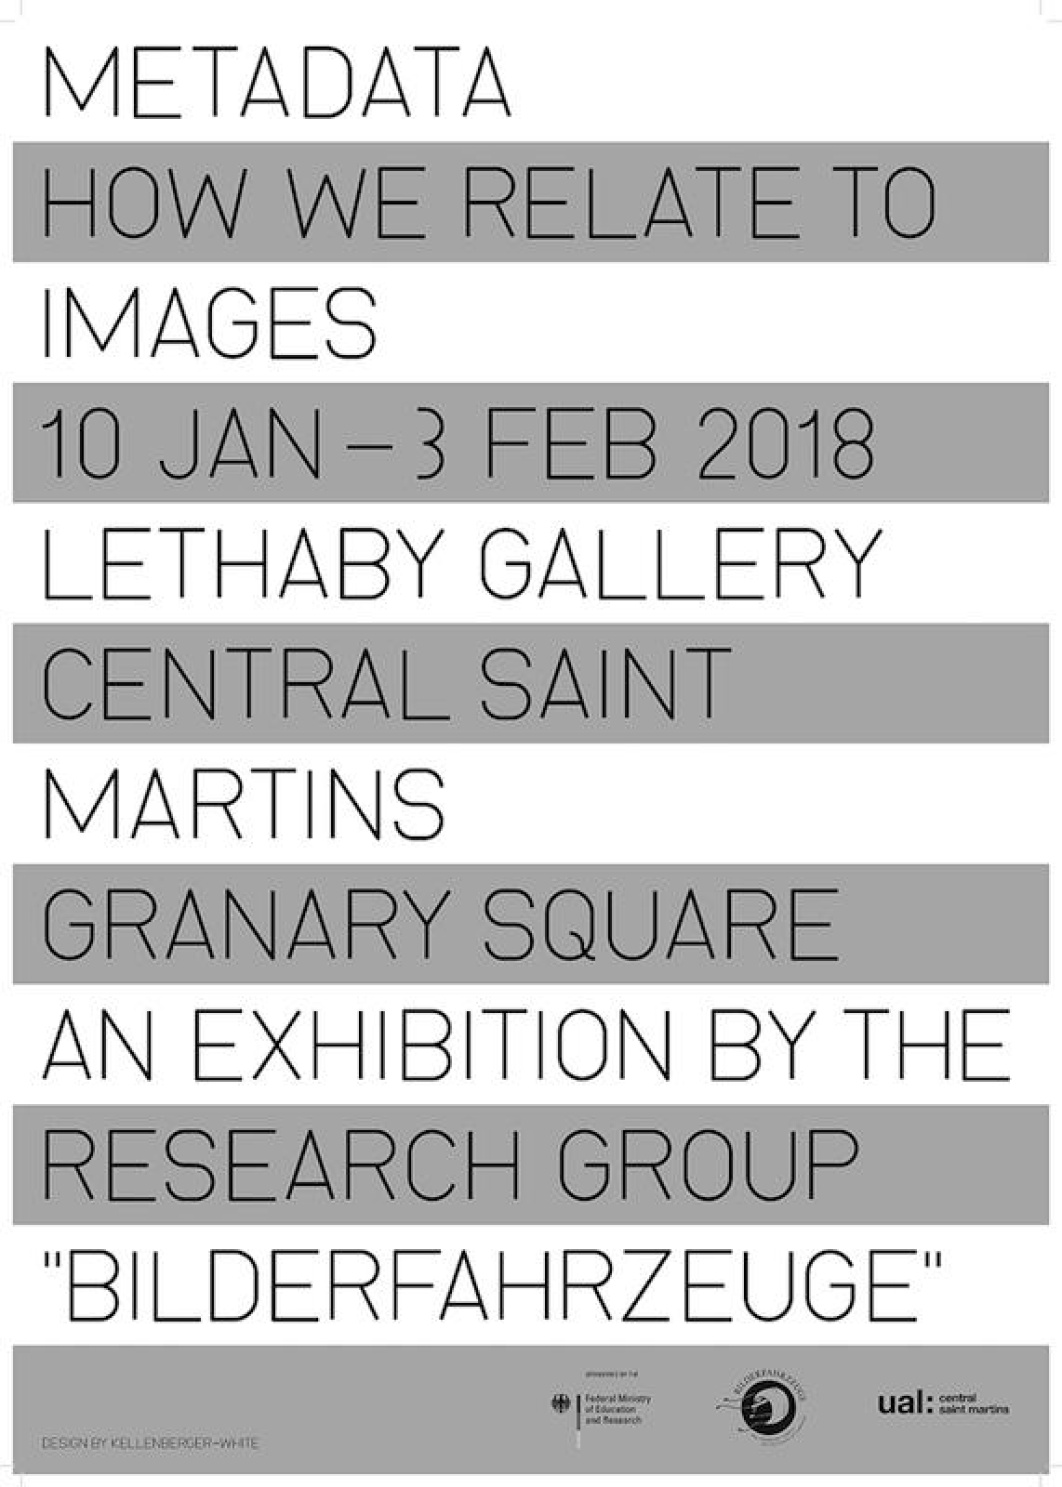 Metadata: how we relate to images - Lethaby Gallery